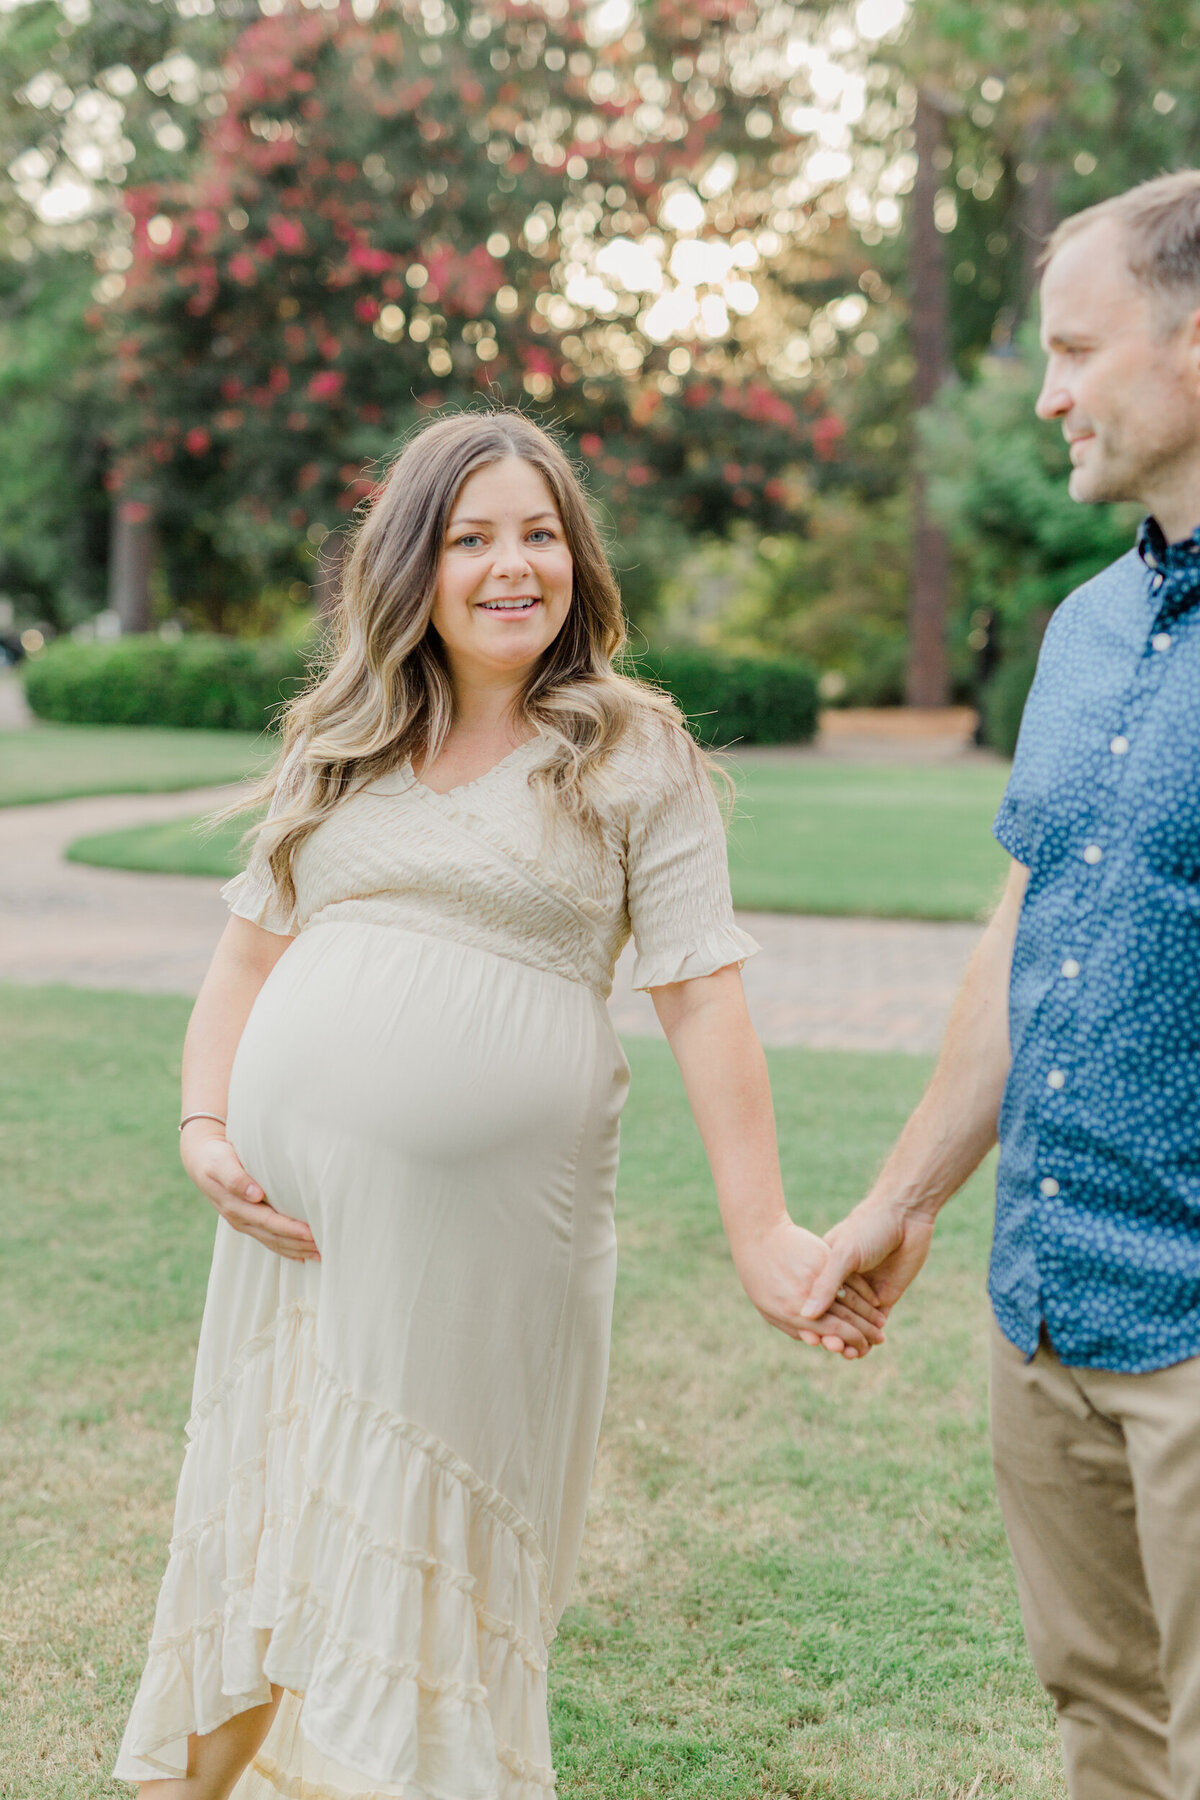 North-Raleigh-Maternity-Photography-Session-Danielle-Pressley44